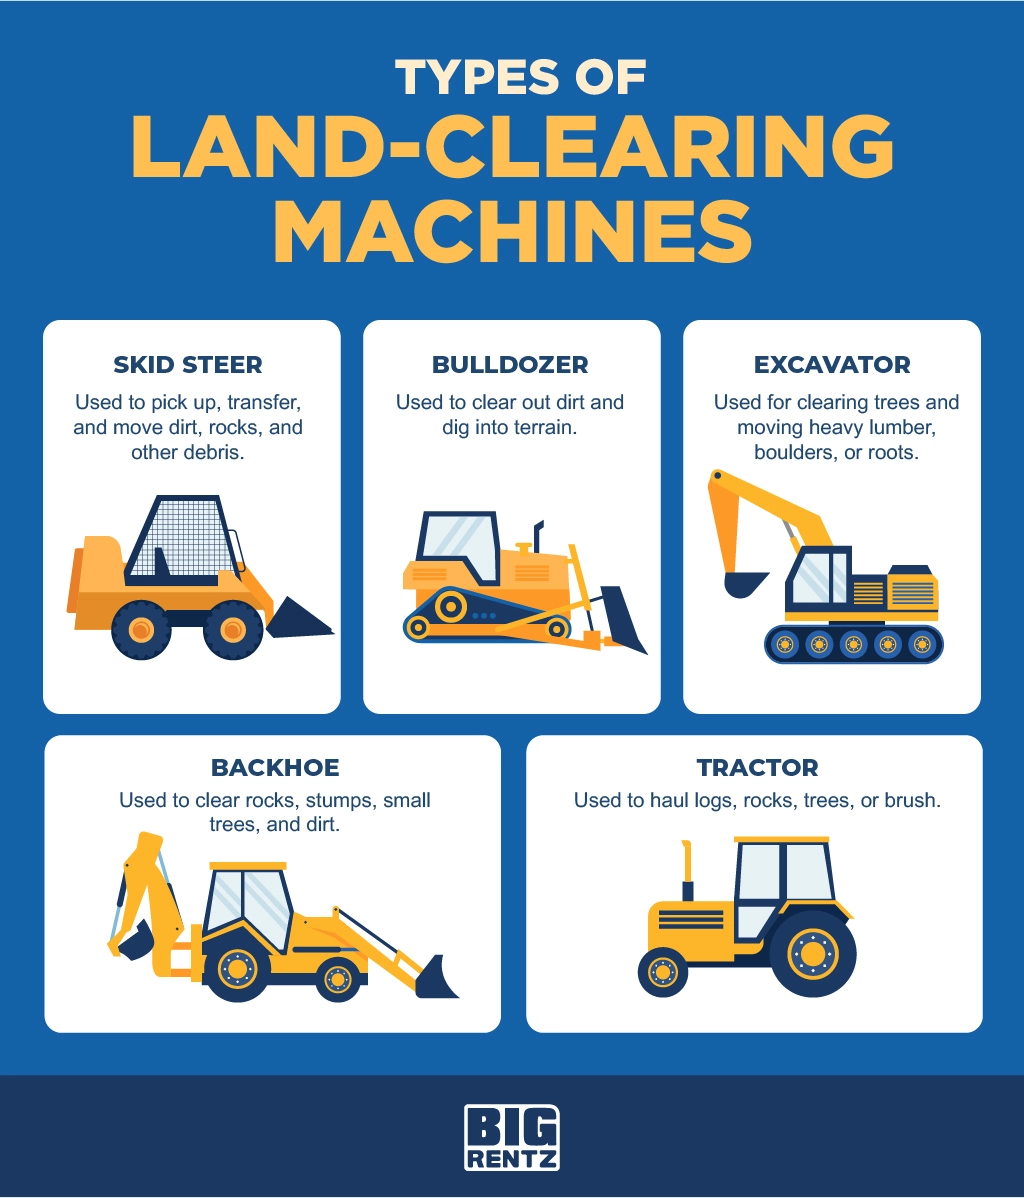 Top Land Clearing Services: Quality Matters